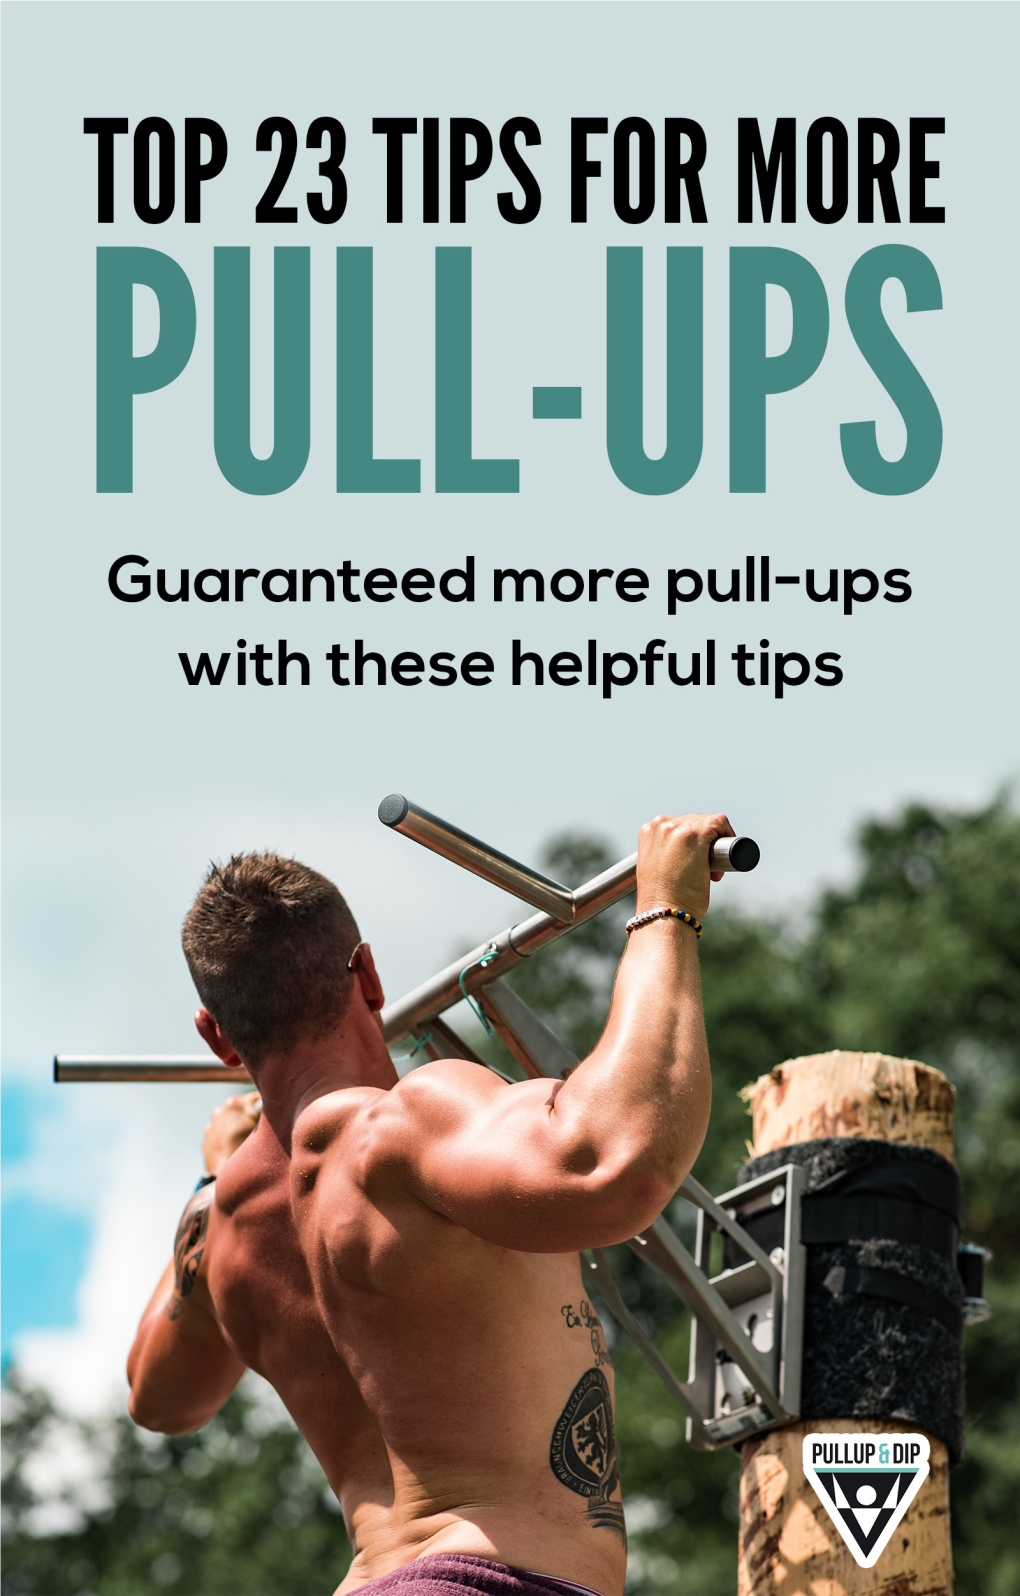 The Top 23 Tips for More Pull-Ups